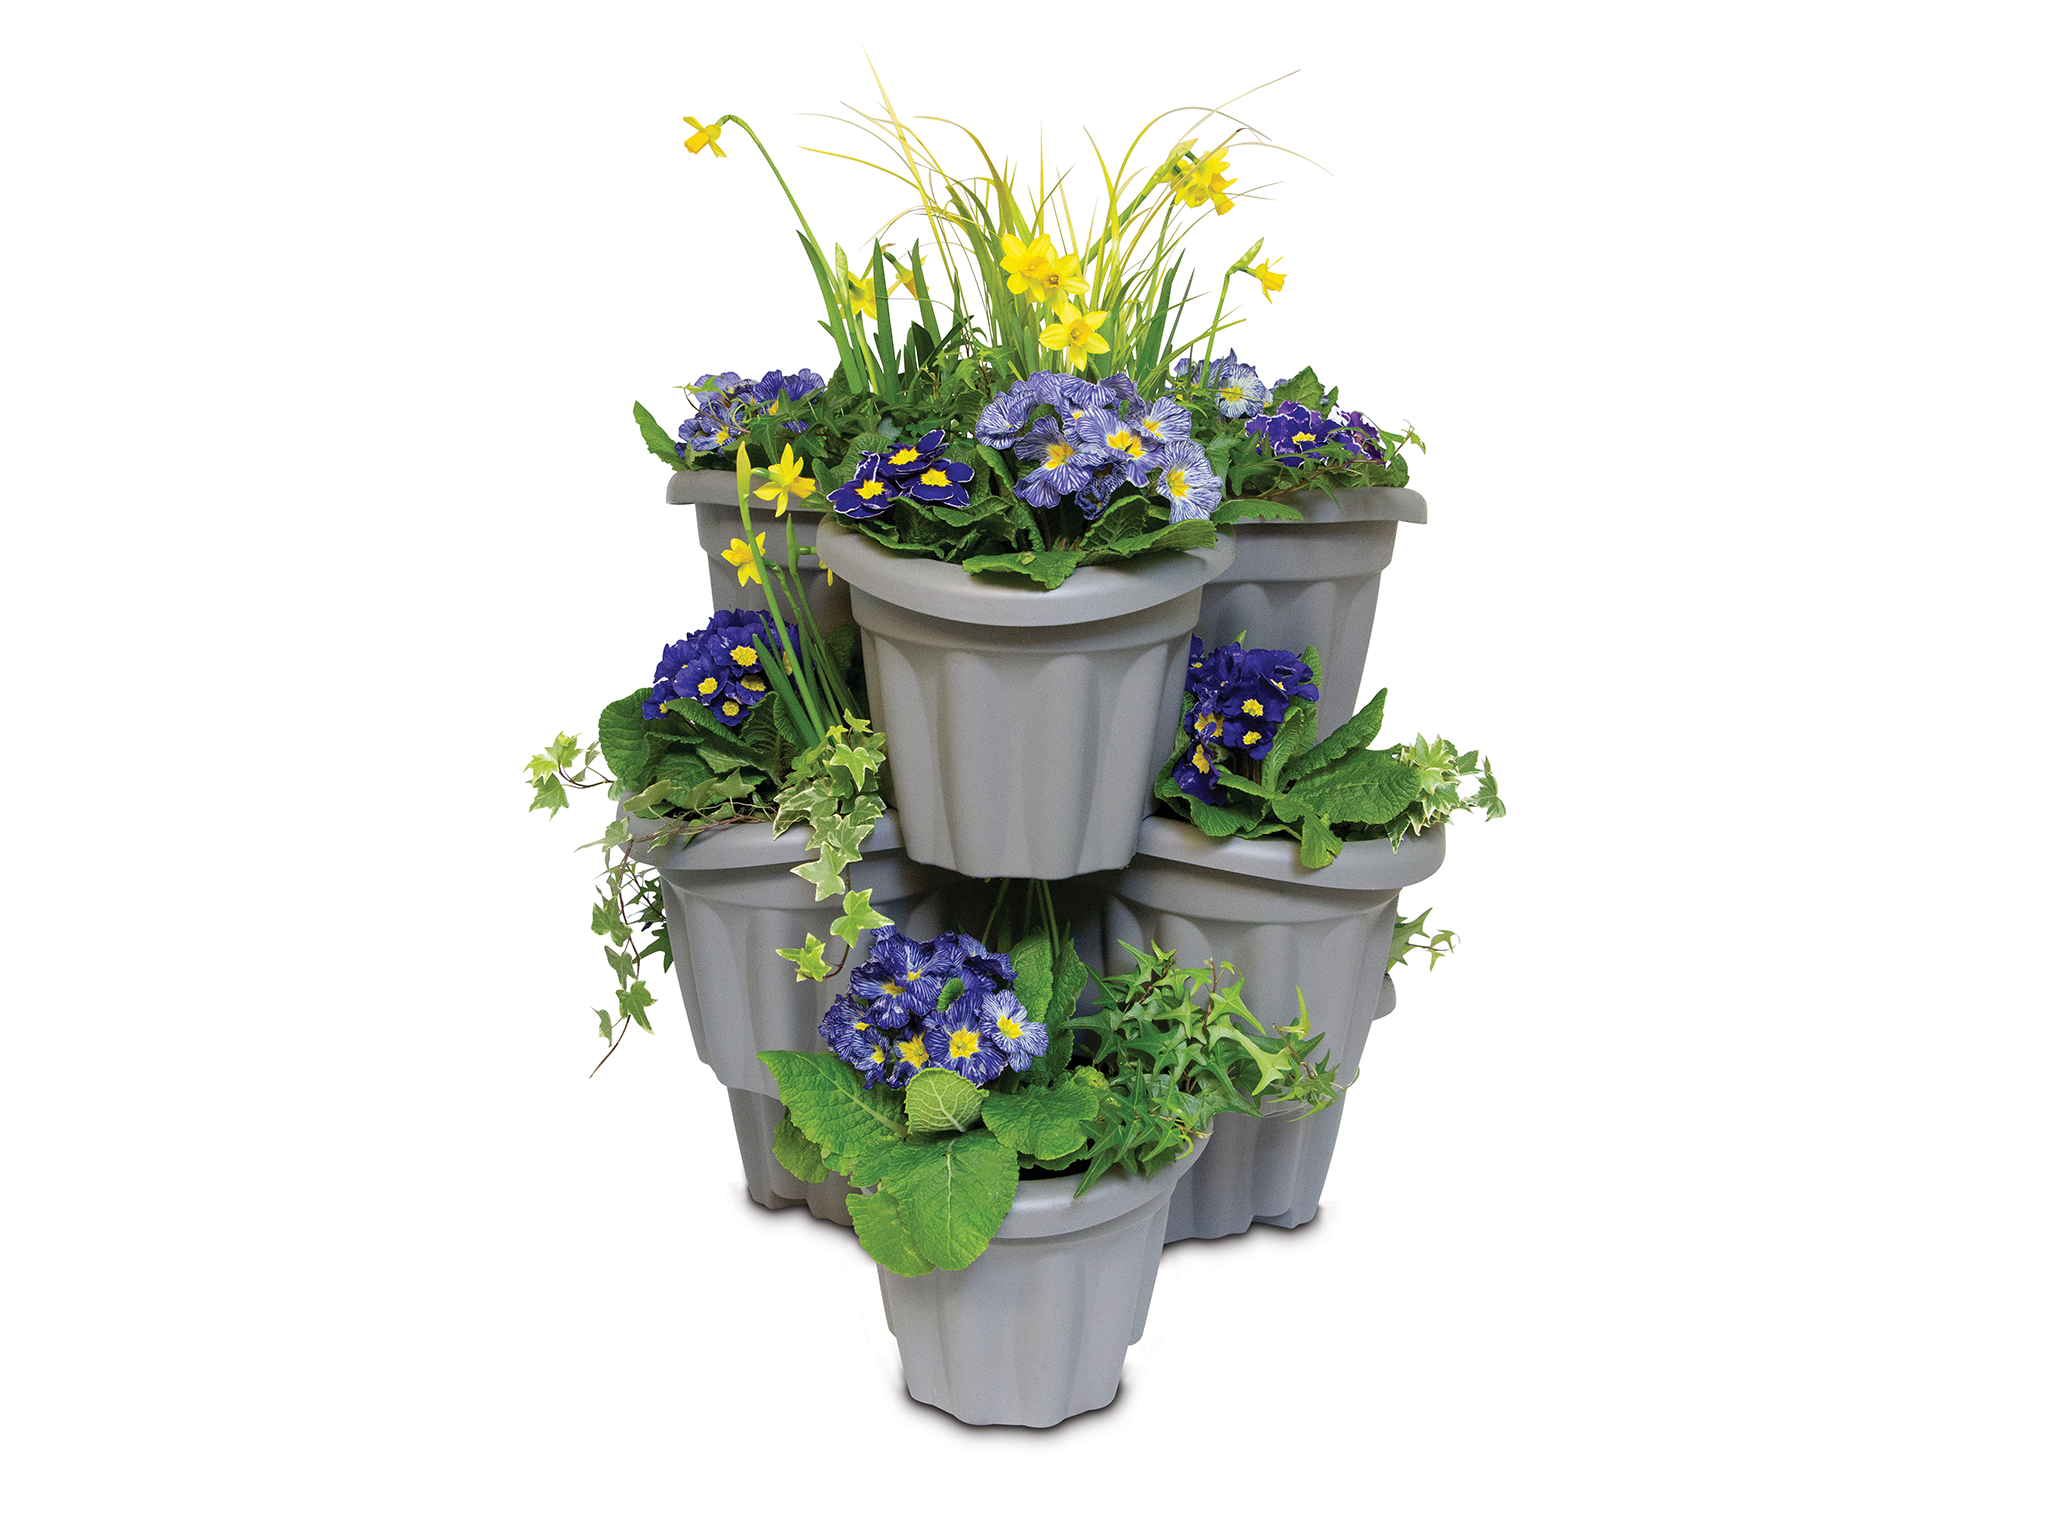 Town and Co tiered planters